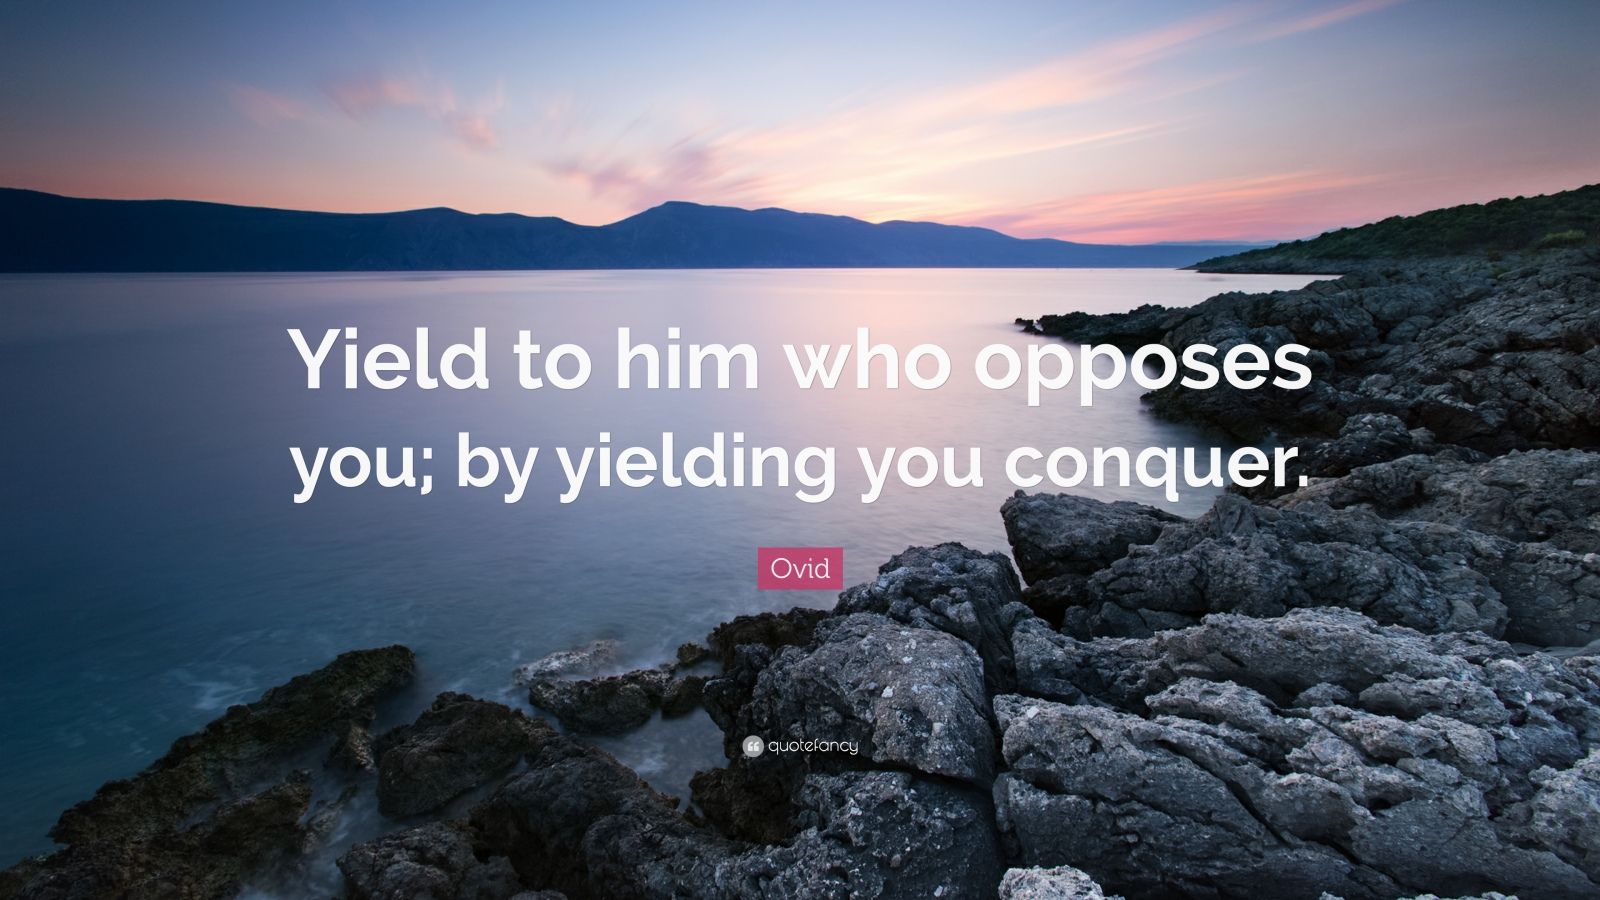 Top 450 Ovid Quotes 2021 Edition Free Images QuoteFancy